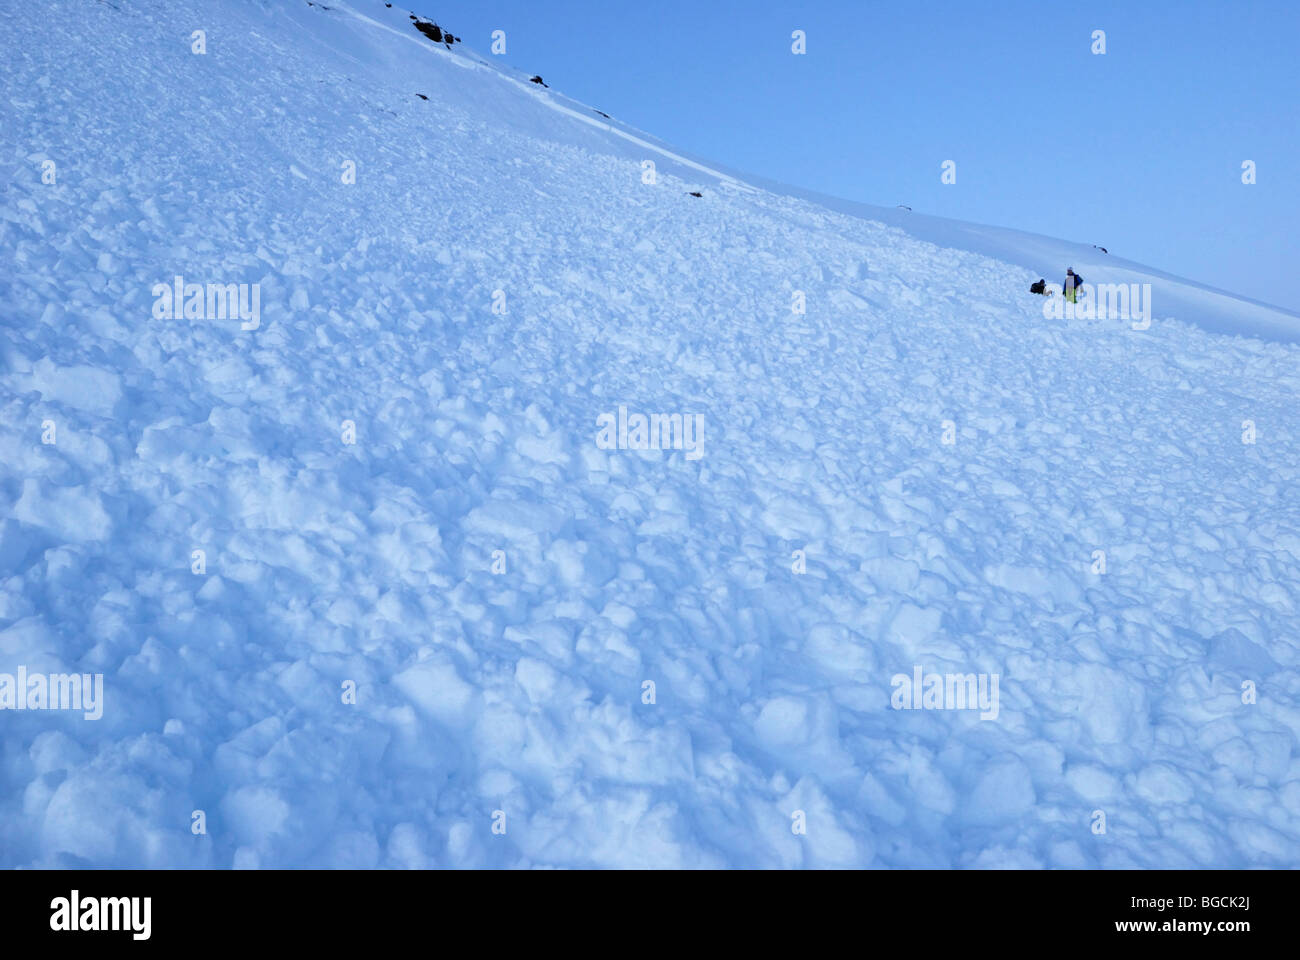 Two skiers caught in an avalanche, self extricating from partial burial, Tamokdalen, Norway Stock Photo